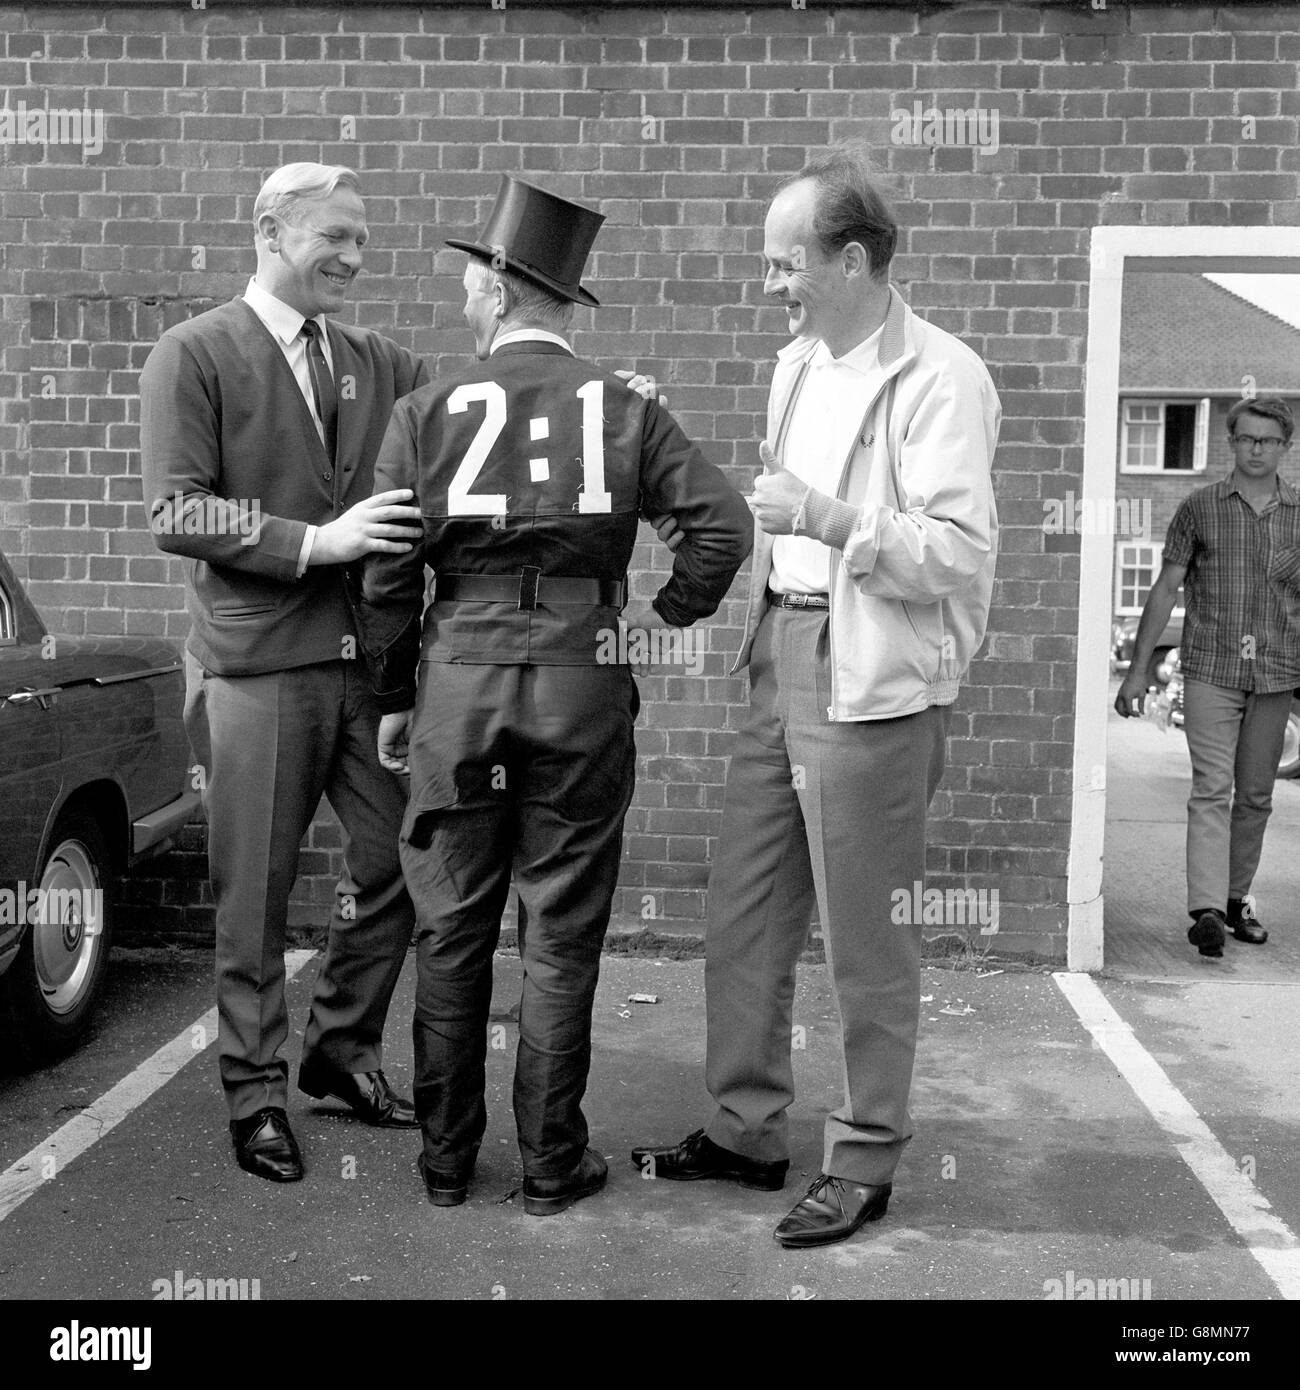 A West Germany fan dressed as a chimney sweep (a German symbol of good luck) is congratulated on his prediction for the World Cup Final scoreline by team advisor Bert Trautmann (l) and team doctor W. Gerhardt (r) as they meet on the morning of the final outside the team's hotel Stock Photo